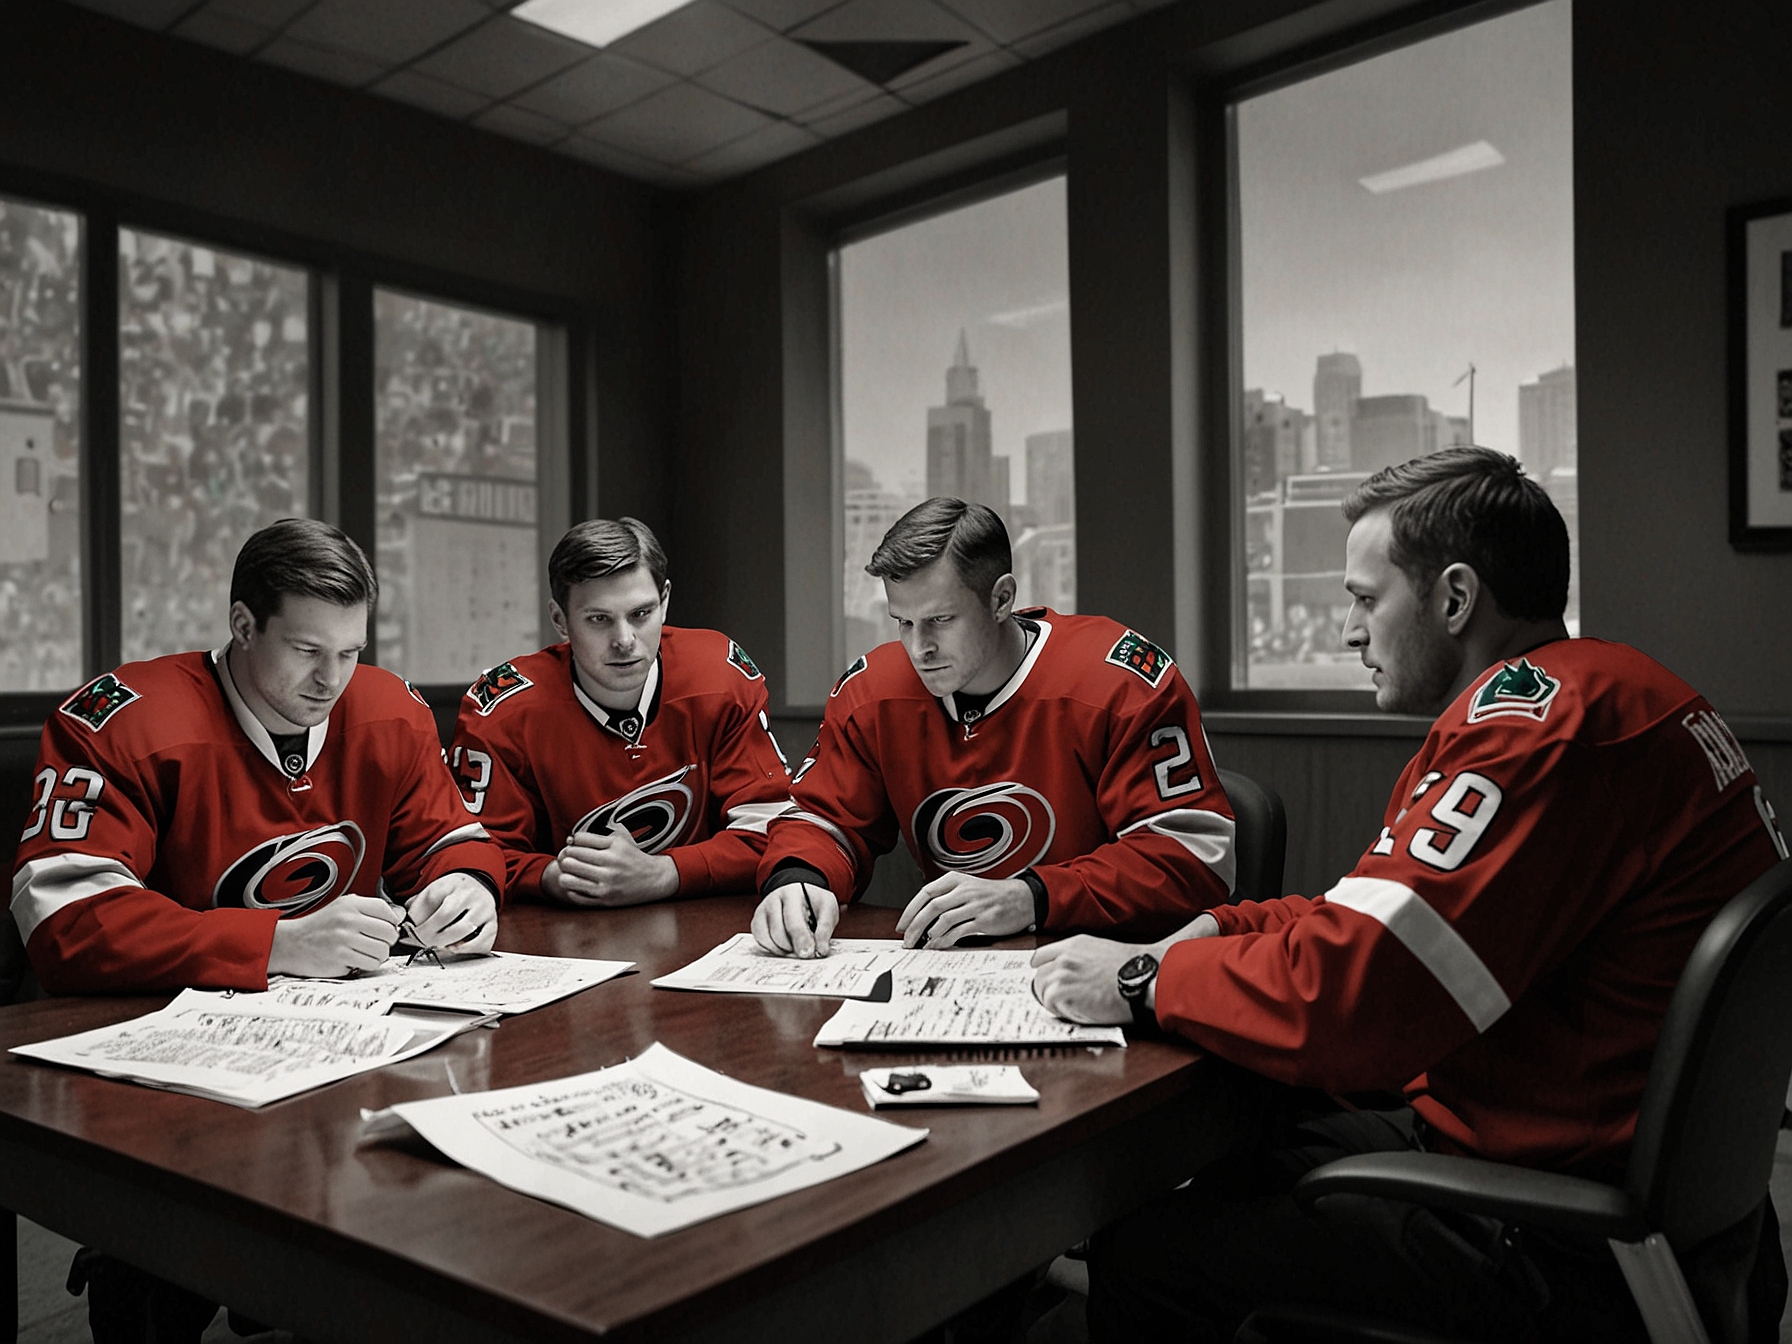 The Carolina Hurricanes management is seen in a strategic meeting discussing the issuance of qualifying offers to their key young players, focusing on retaining and developing future talents.